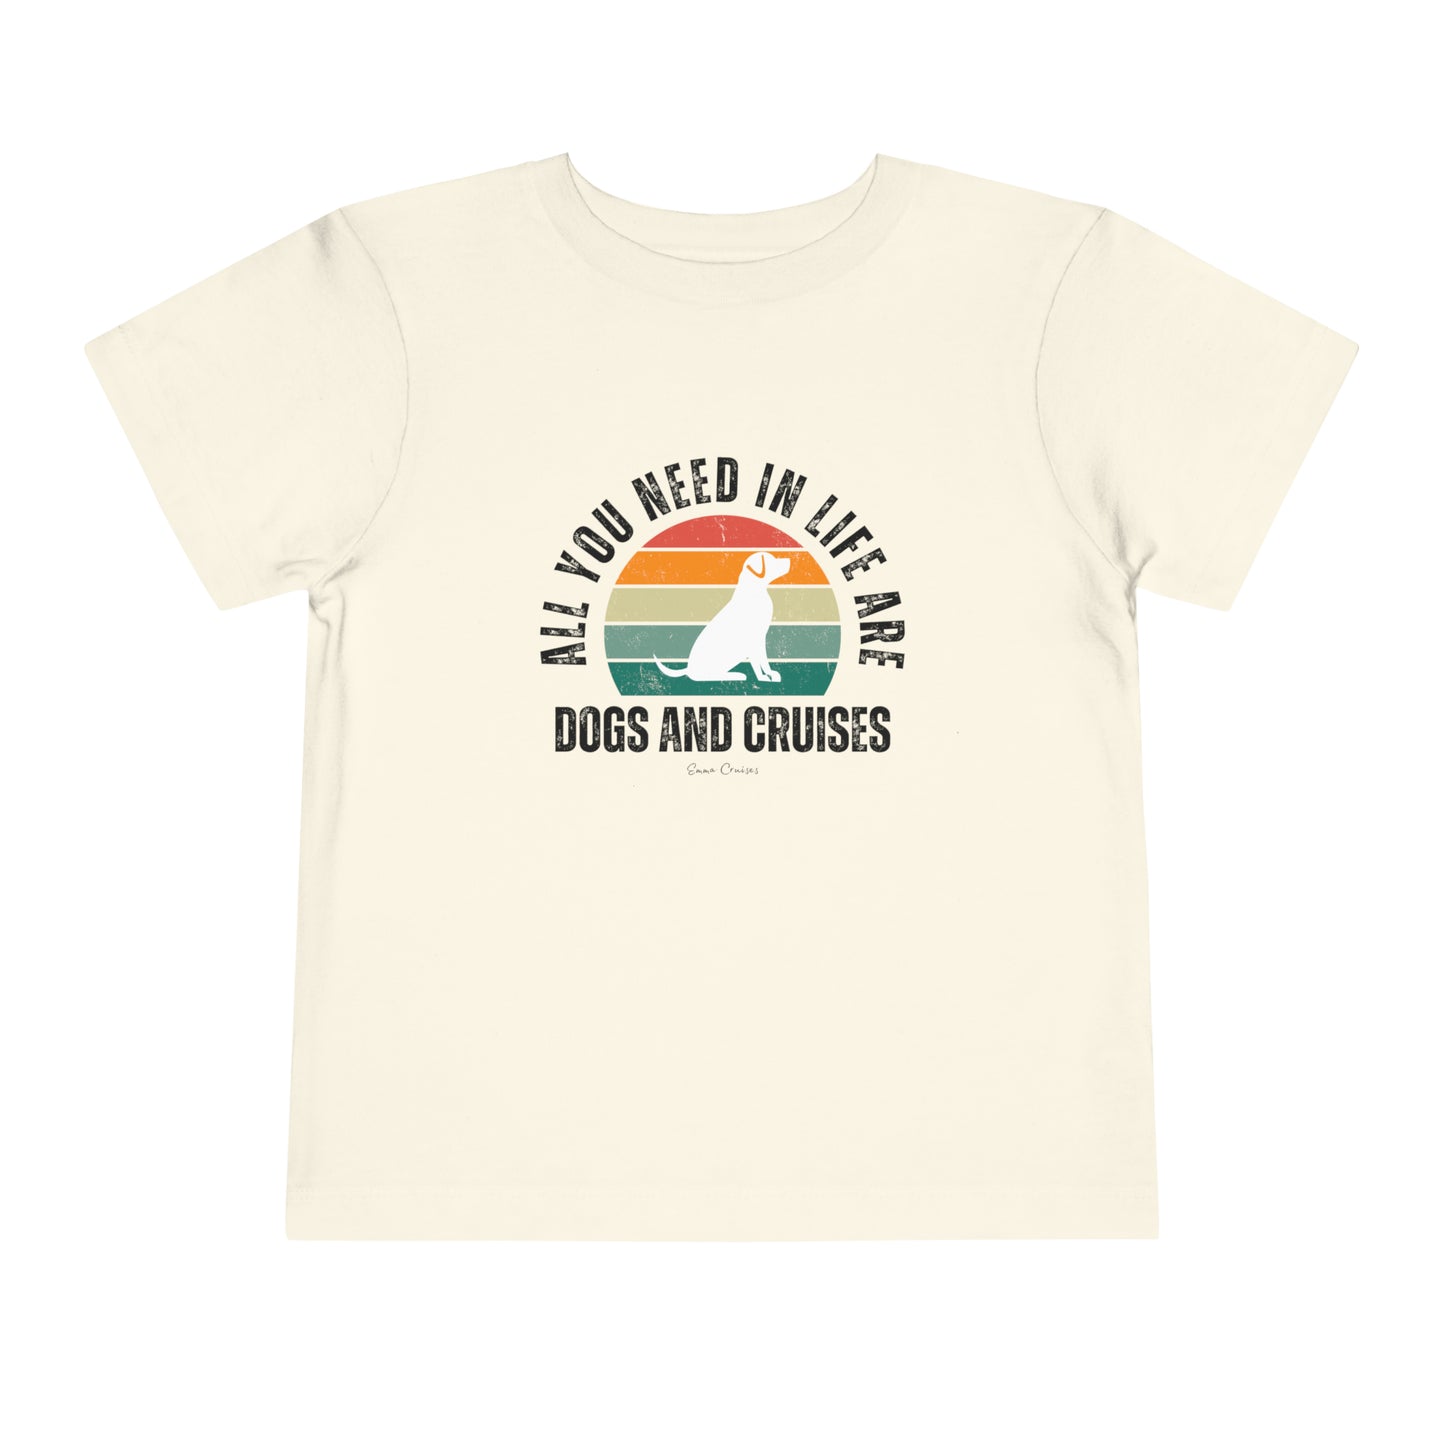 Dogs and Cruises - Toddler UNISEX T-Shirt